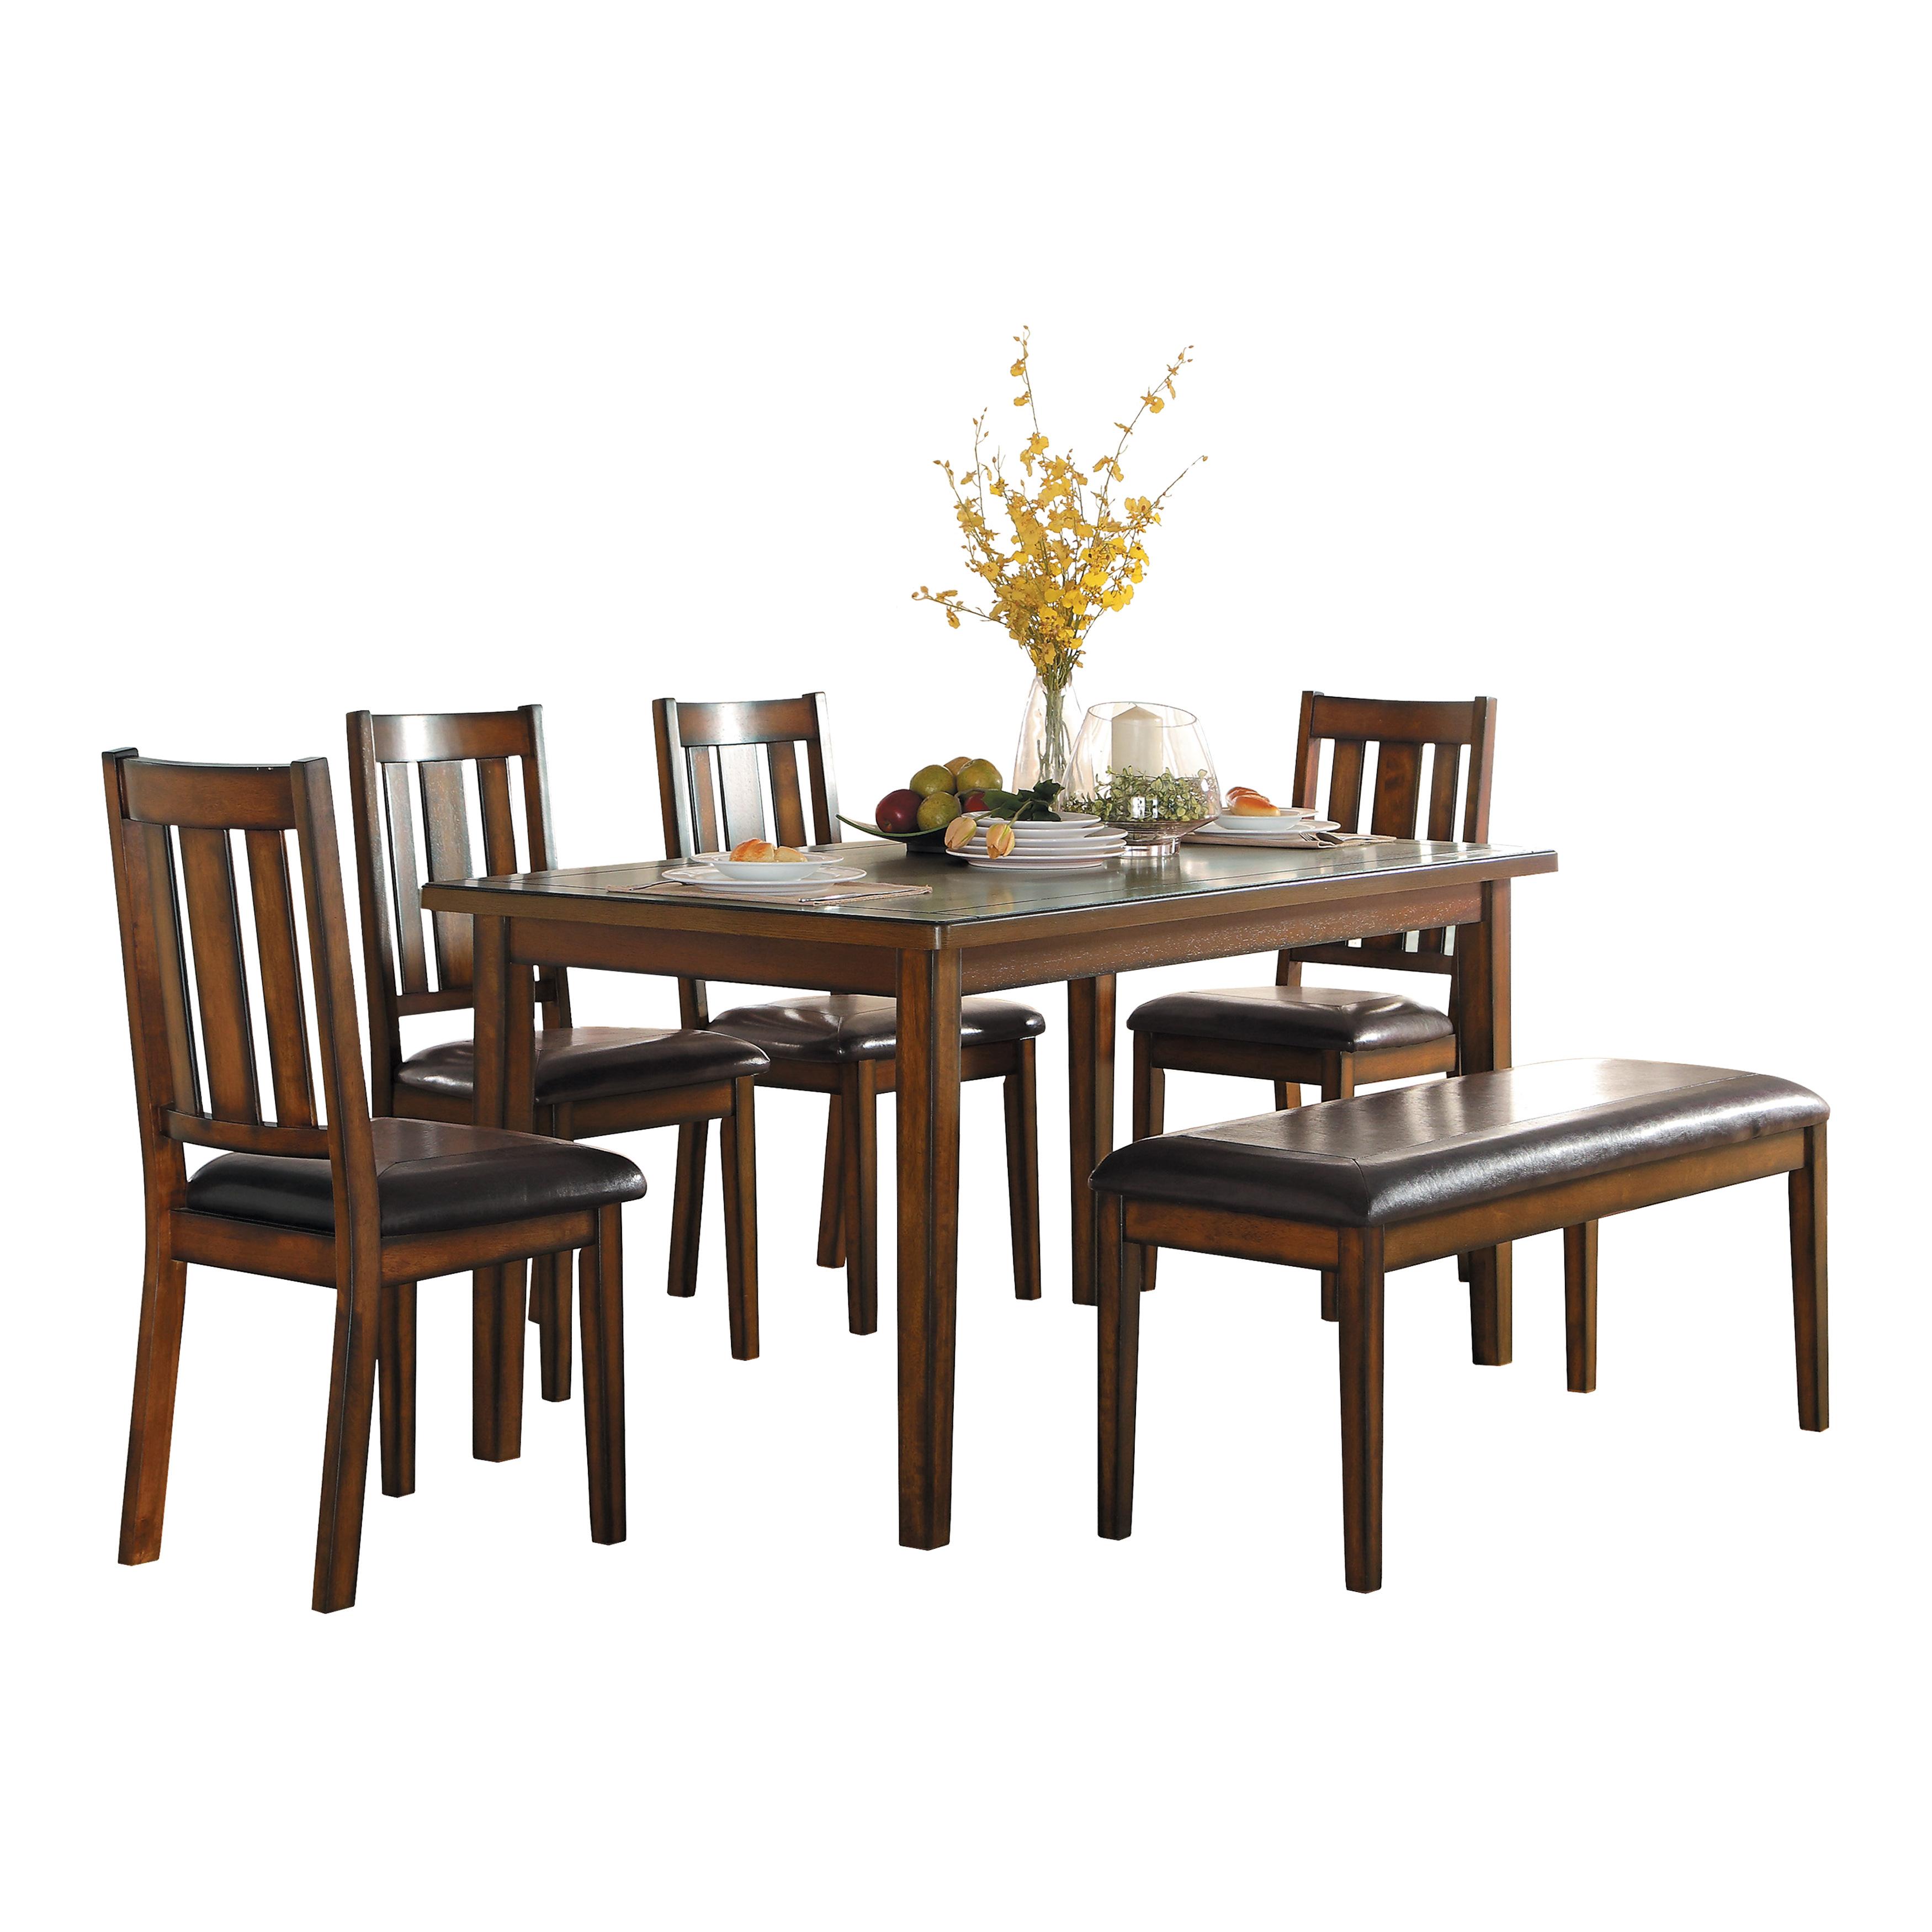 Transitional Dining Room Set 5511 Delmar 5511 in Espresso Faux Leather